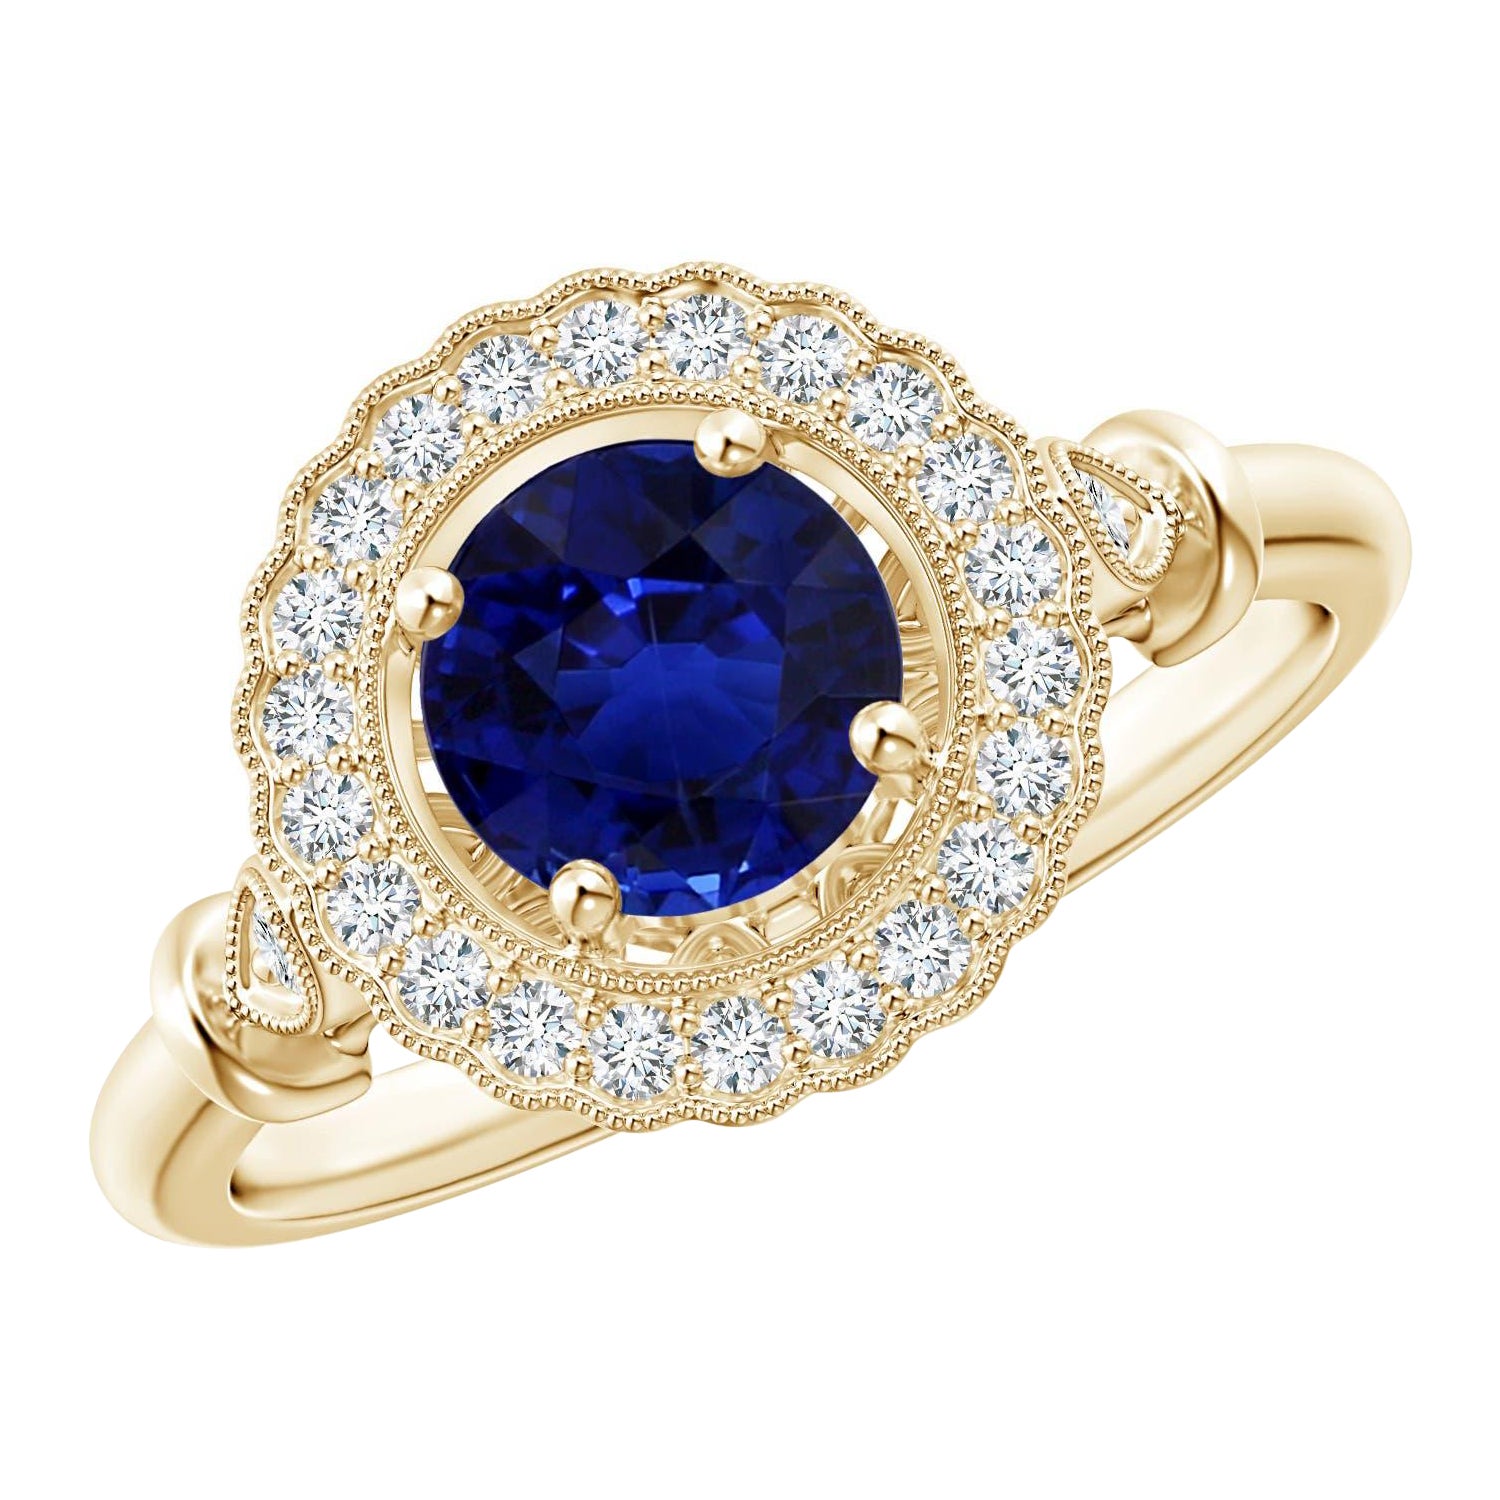 For Sale:  Angara GIA Certified Natural Sapphire Art Deco Inspired Halo Ring in Yellow Gold